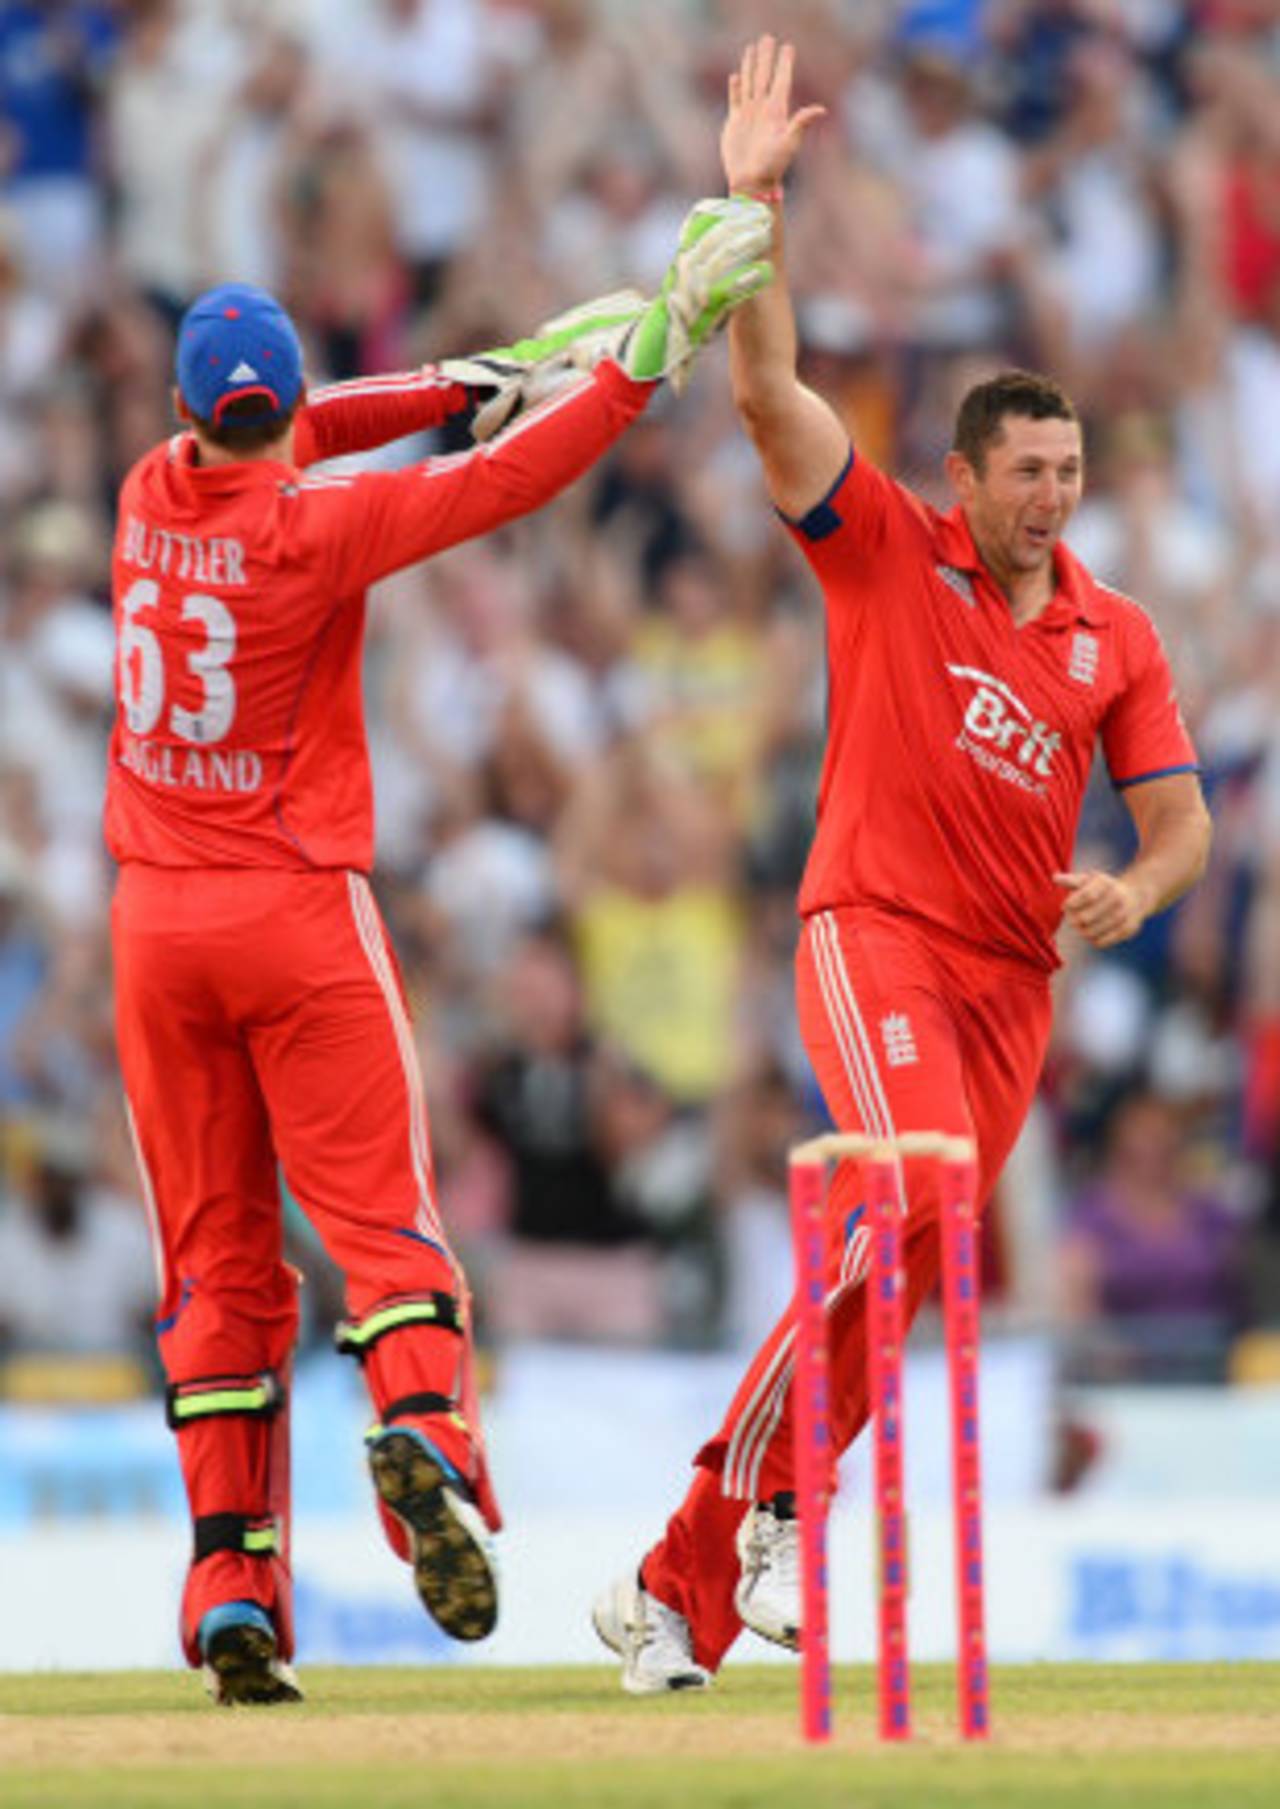 Tim Bresnan gave England hope with two wickets in two balls, West Indies v England, 2nd T20, Barbados, March 11, 2014